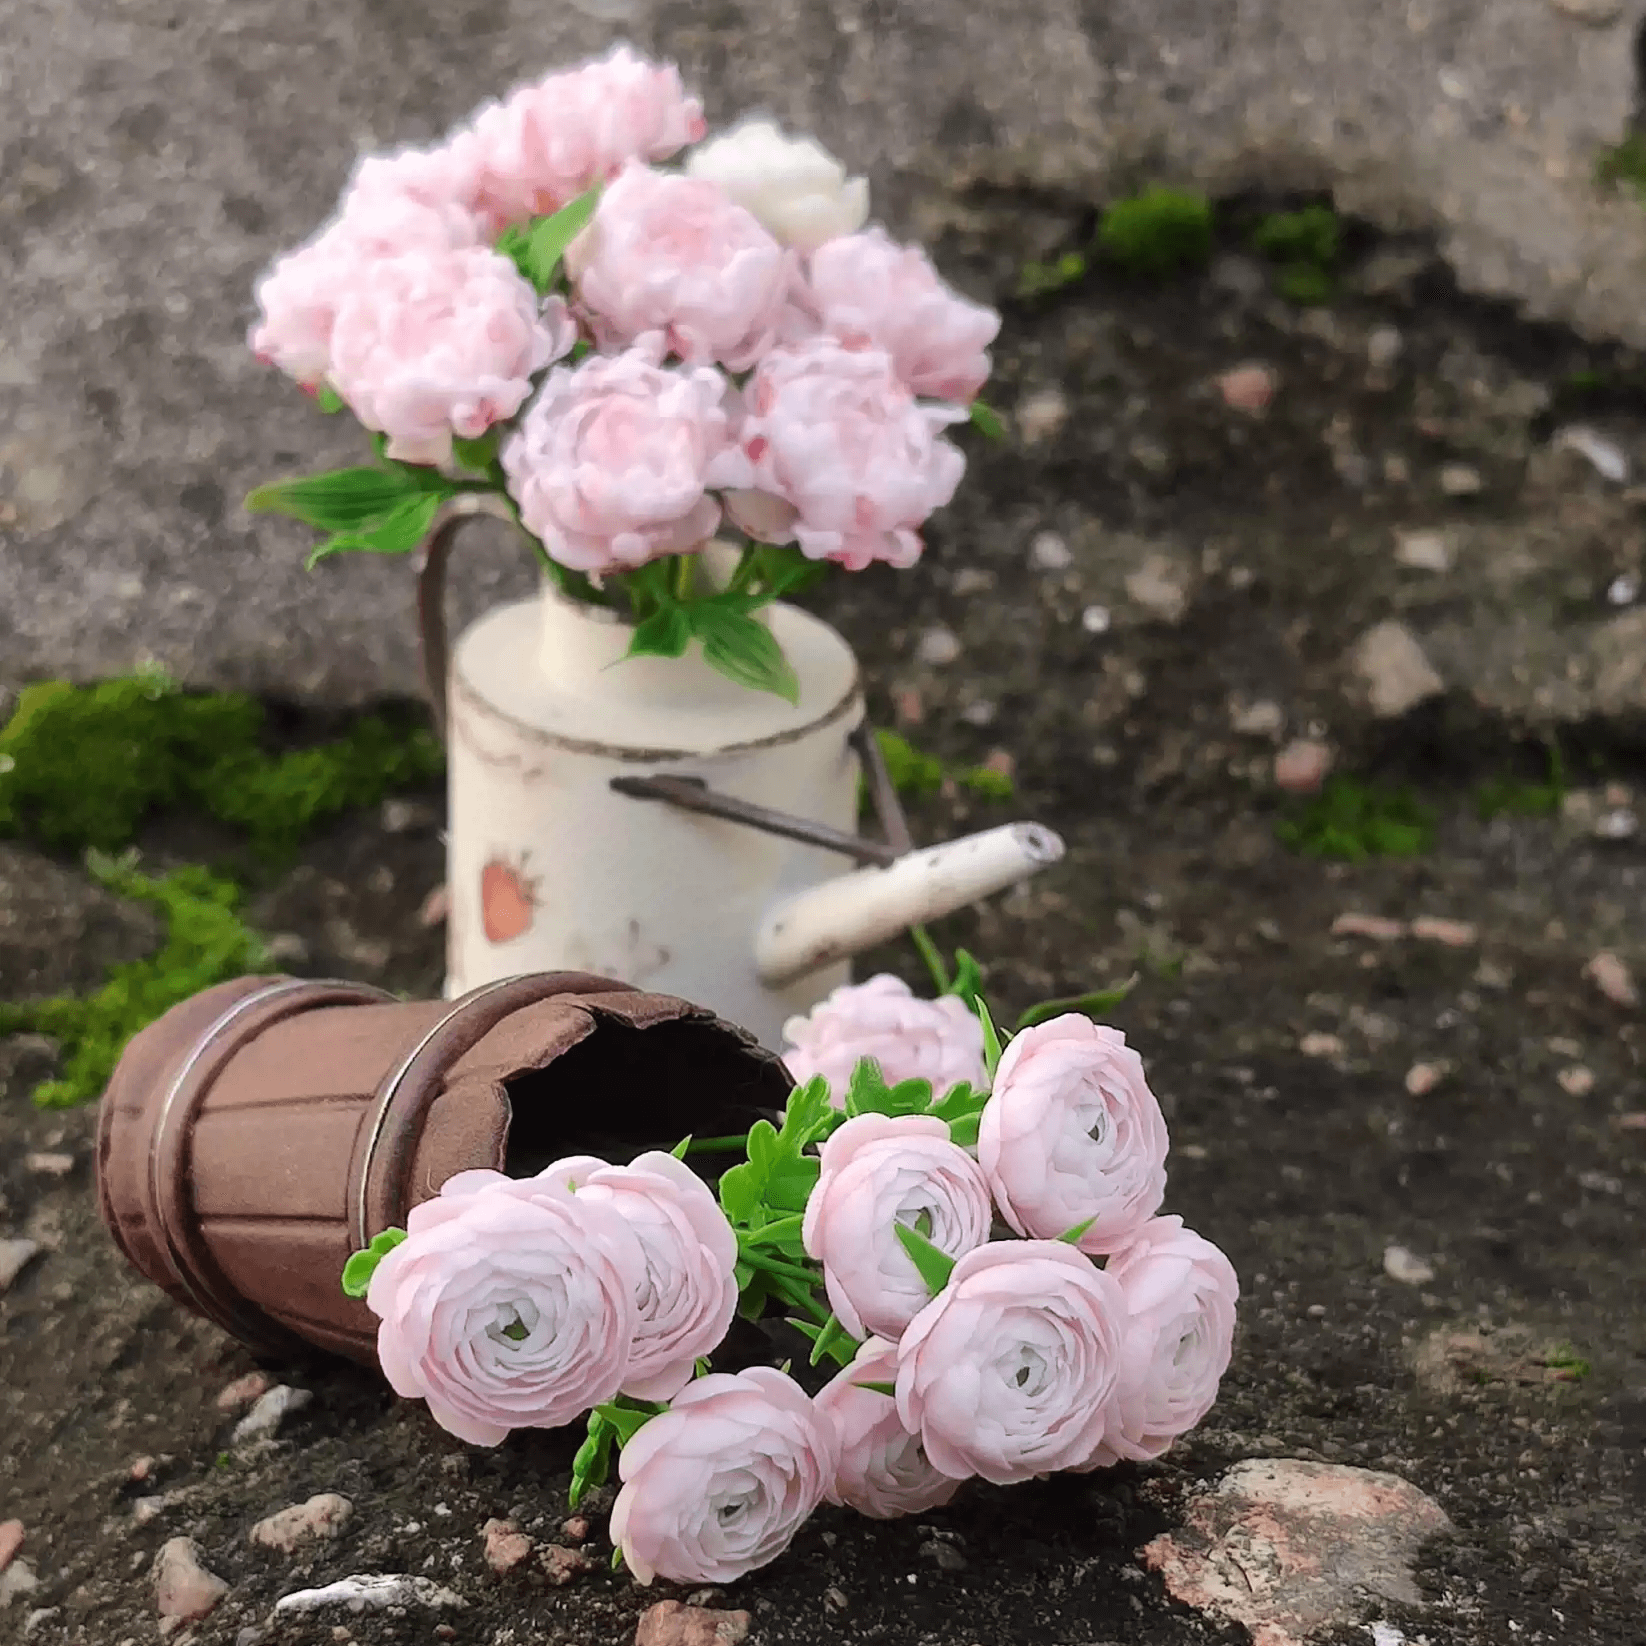 A subtle shade of pink this peony stem will create a peaceful vibe in dollhouse or fairy garden. Miniature for dolls, dollhouses, roomboxes. Suitable for Blythe, Barbie, Paola,and other dolls with a height of 25-40cm (10-15.8 inches). Scale: 1:6; 1:12 Material: Handmade from Clay